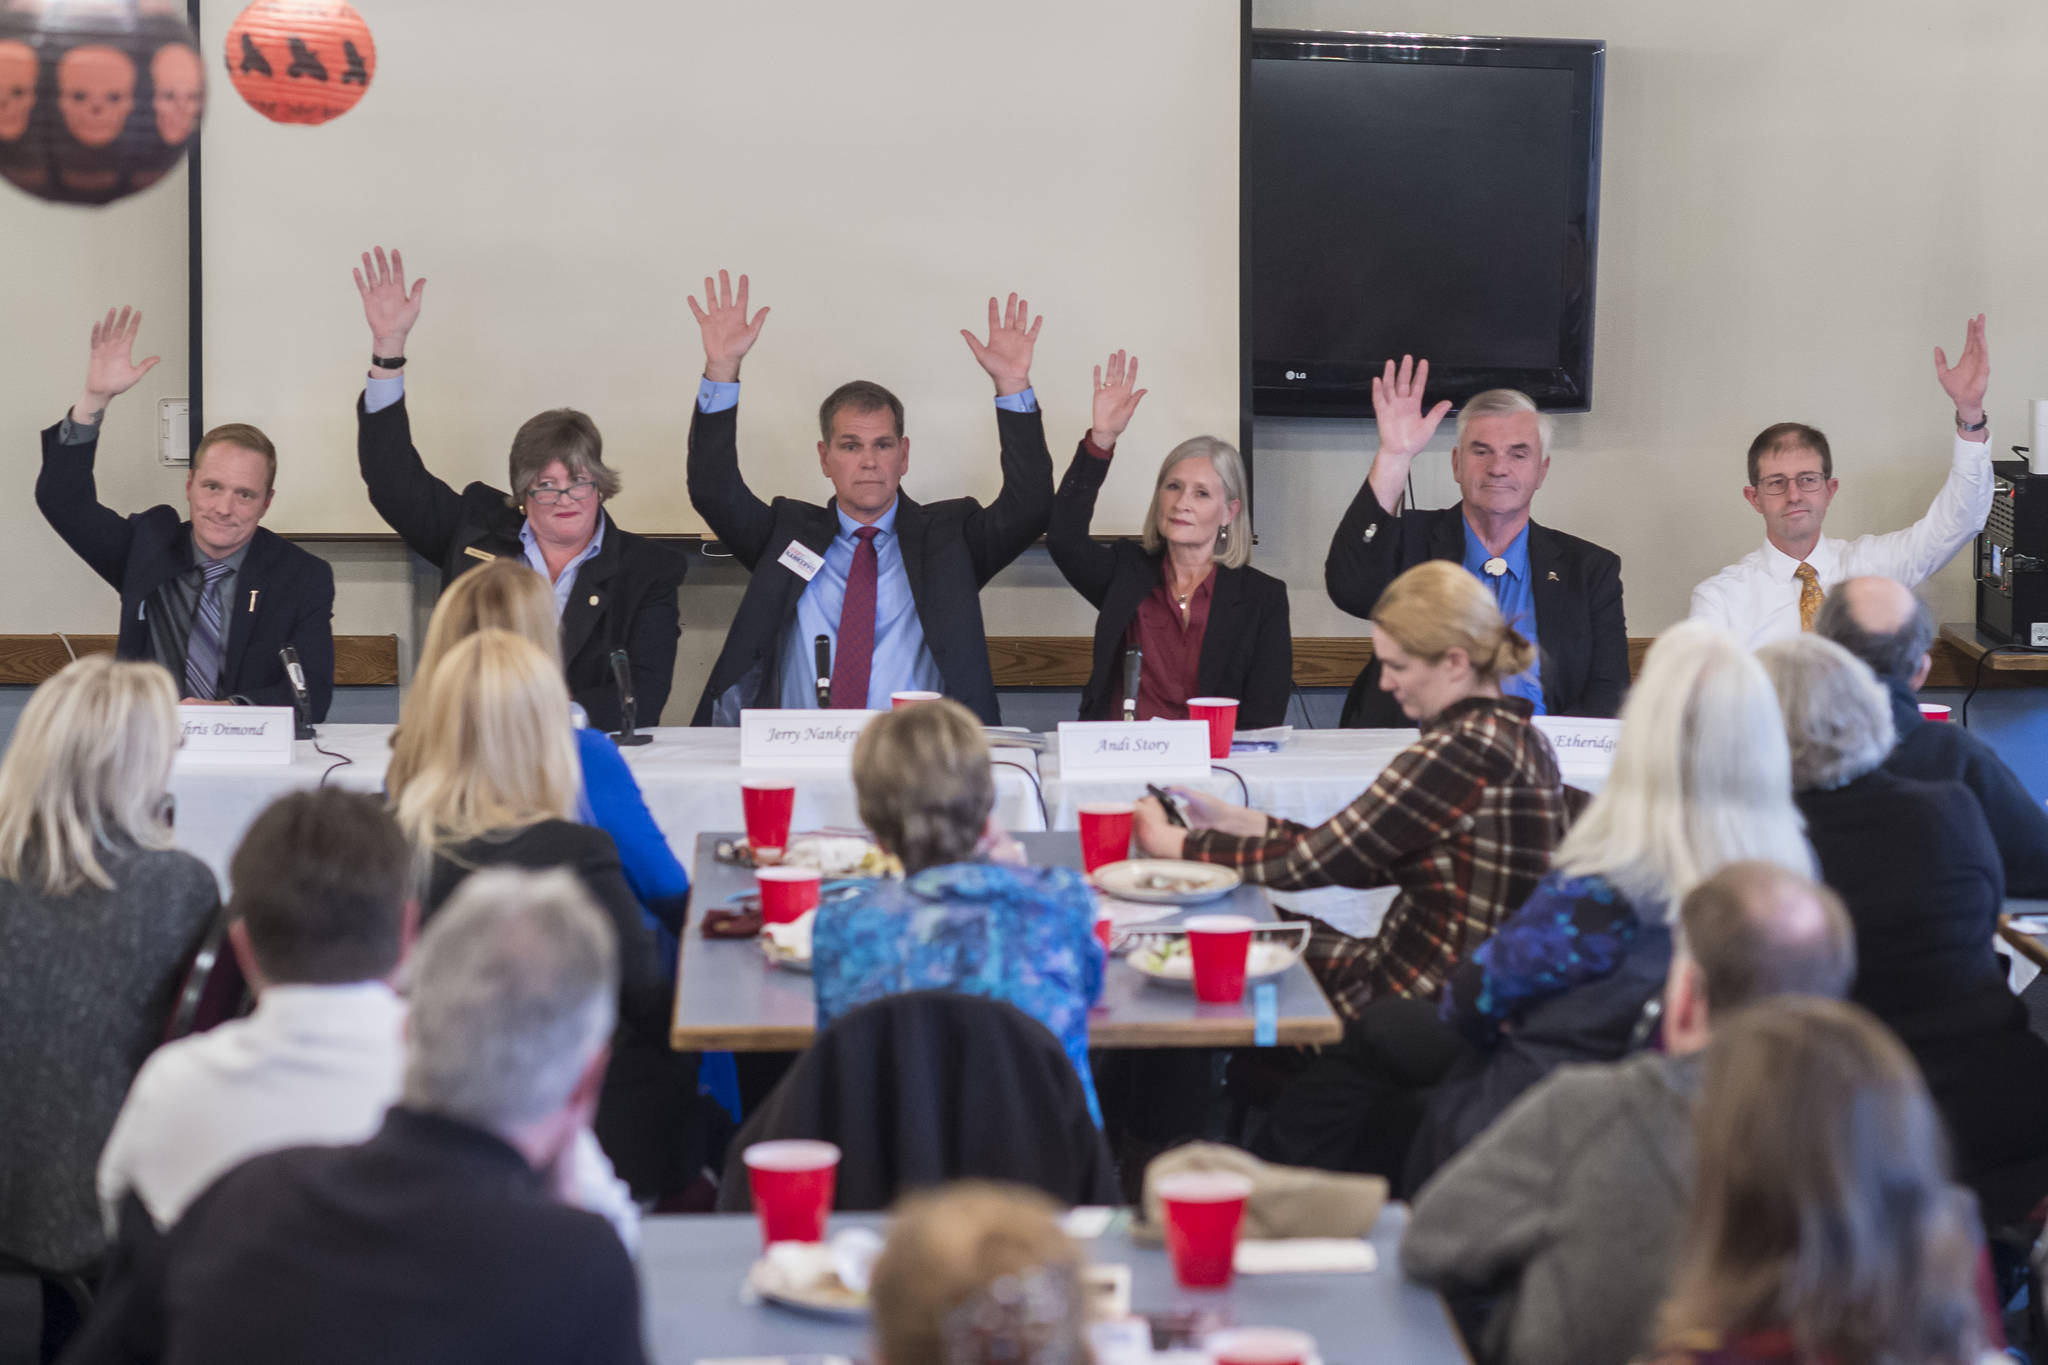 Juneau legislative candidates raise their hands to show they are in favor of a second crossing to Douglas Island during a forum at the Juneau Chamber of Commerce luncheon at the Moose Lodge on Thursday, Oct. 4, 2018. From left: House District 33 candidates Chris Dimond and Sara Hannan, House District 34 candidates Jerry Nankervis and Andi Story, and Senate District Q candidates Don Etheridge and Jesse Kiehl. (Michael Penn | Juneau Empire)